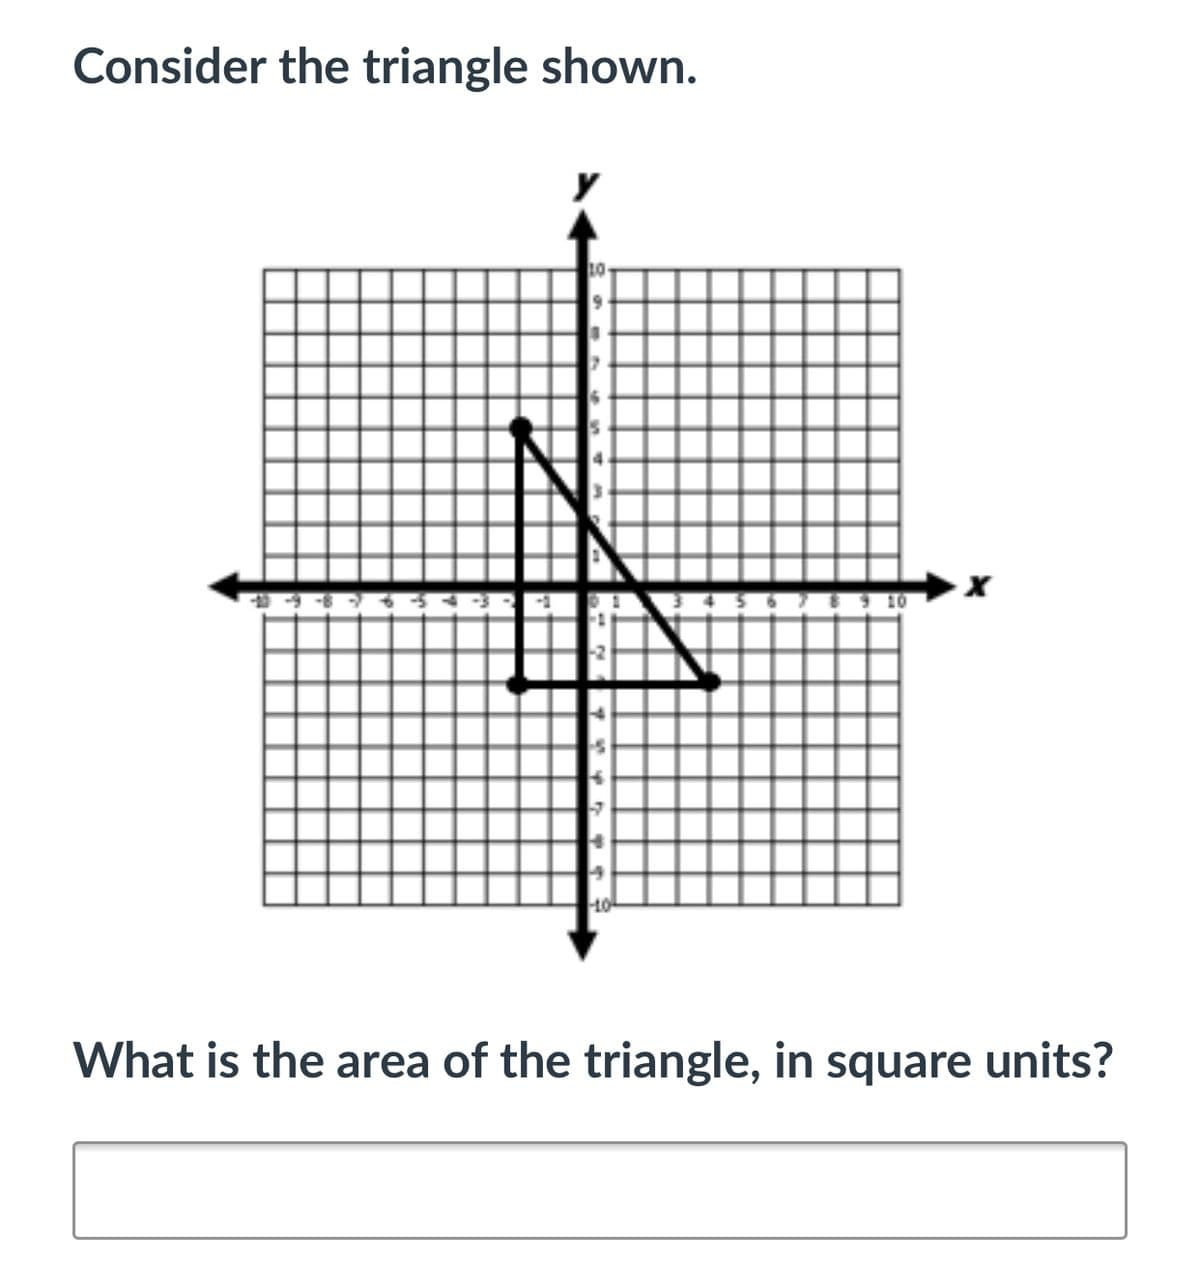 Consider the triangle shown.
What is the area of the triangle, in square units?
